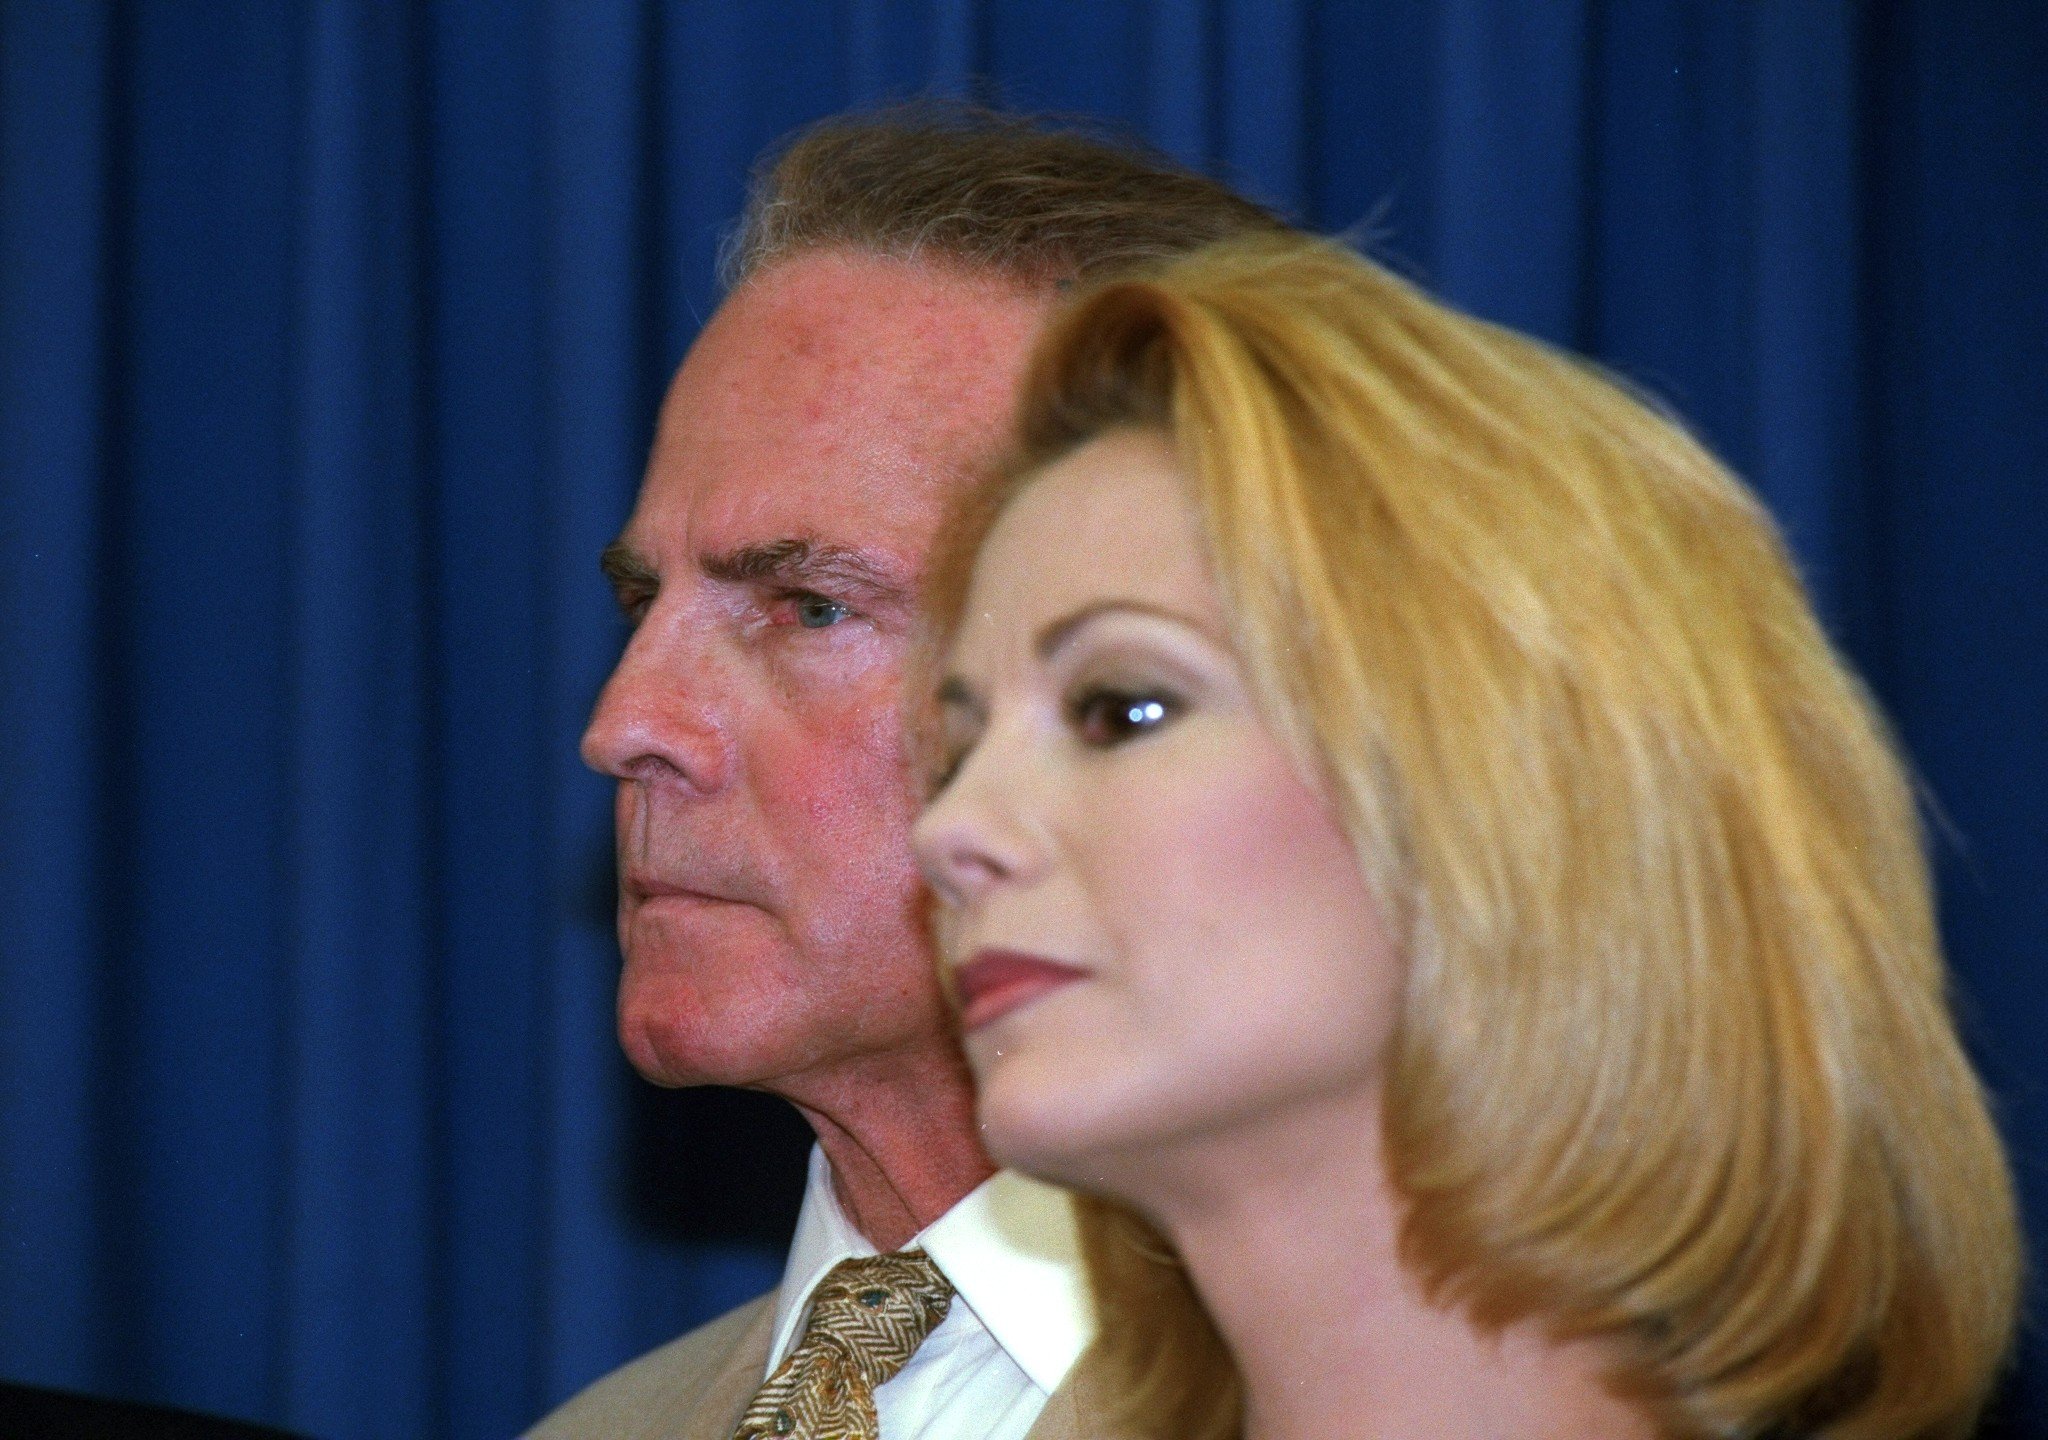 Kathie Lee and Frank Gifford at a news conference proposing legislation to crack down on sweatshops on May 30, 1996. | Source: Andrew Savulich/NY Daily News Archive/Getty Images